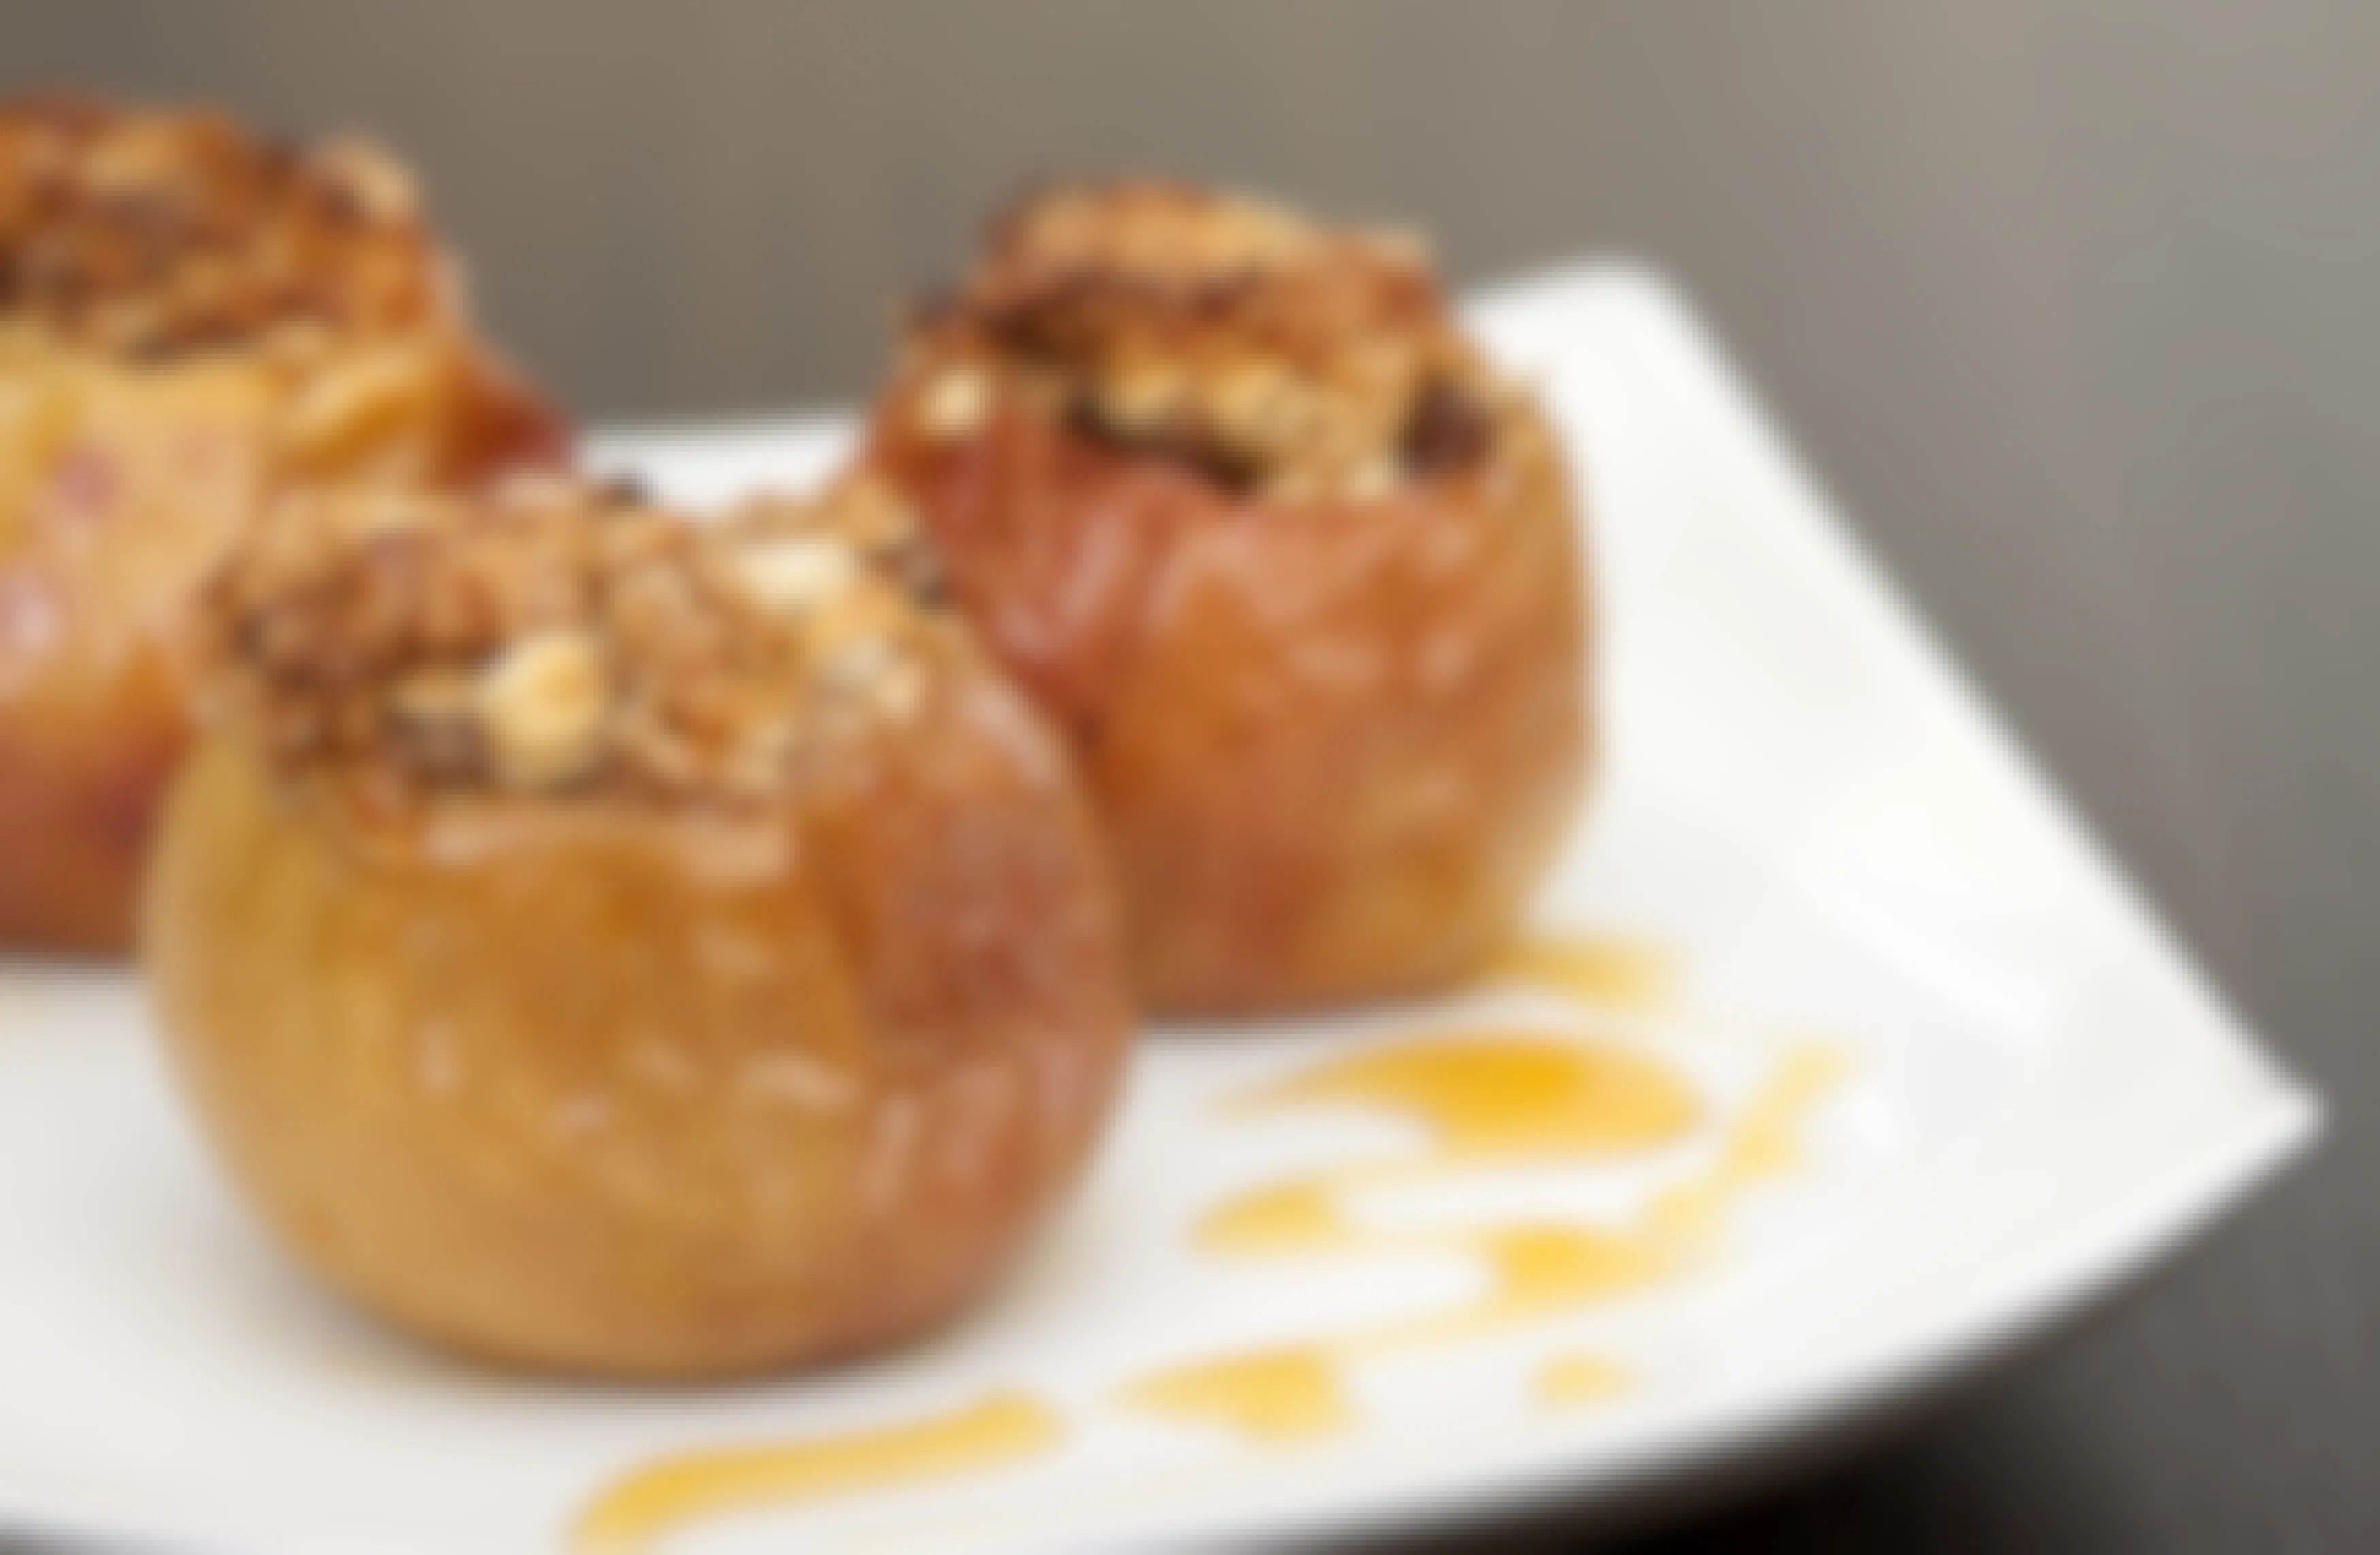 Baked apples filled with granola mix